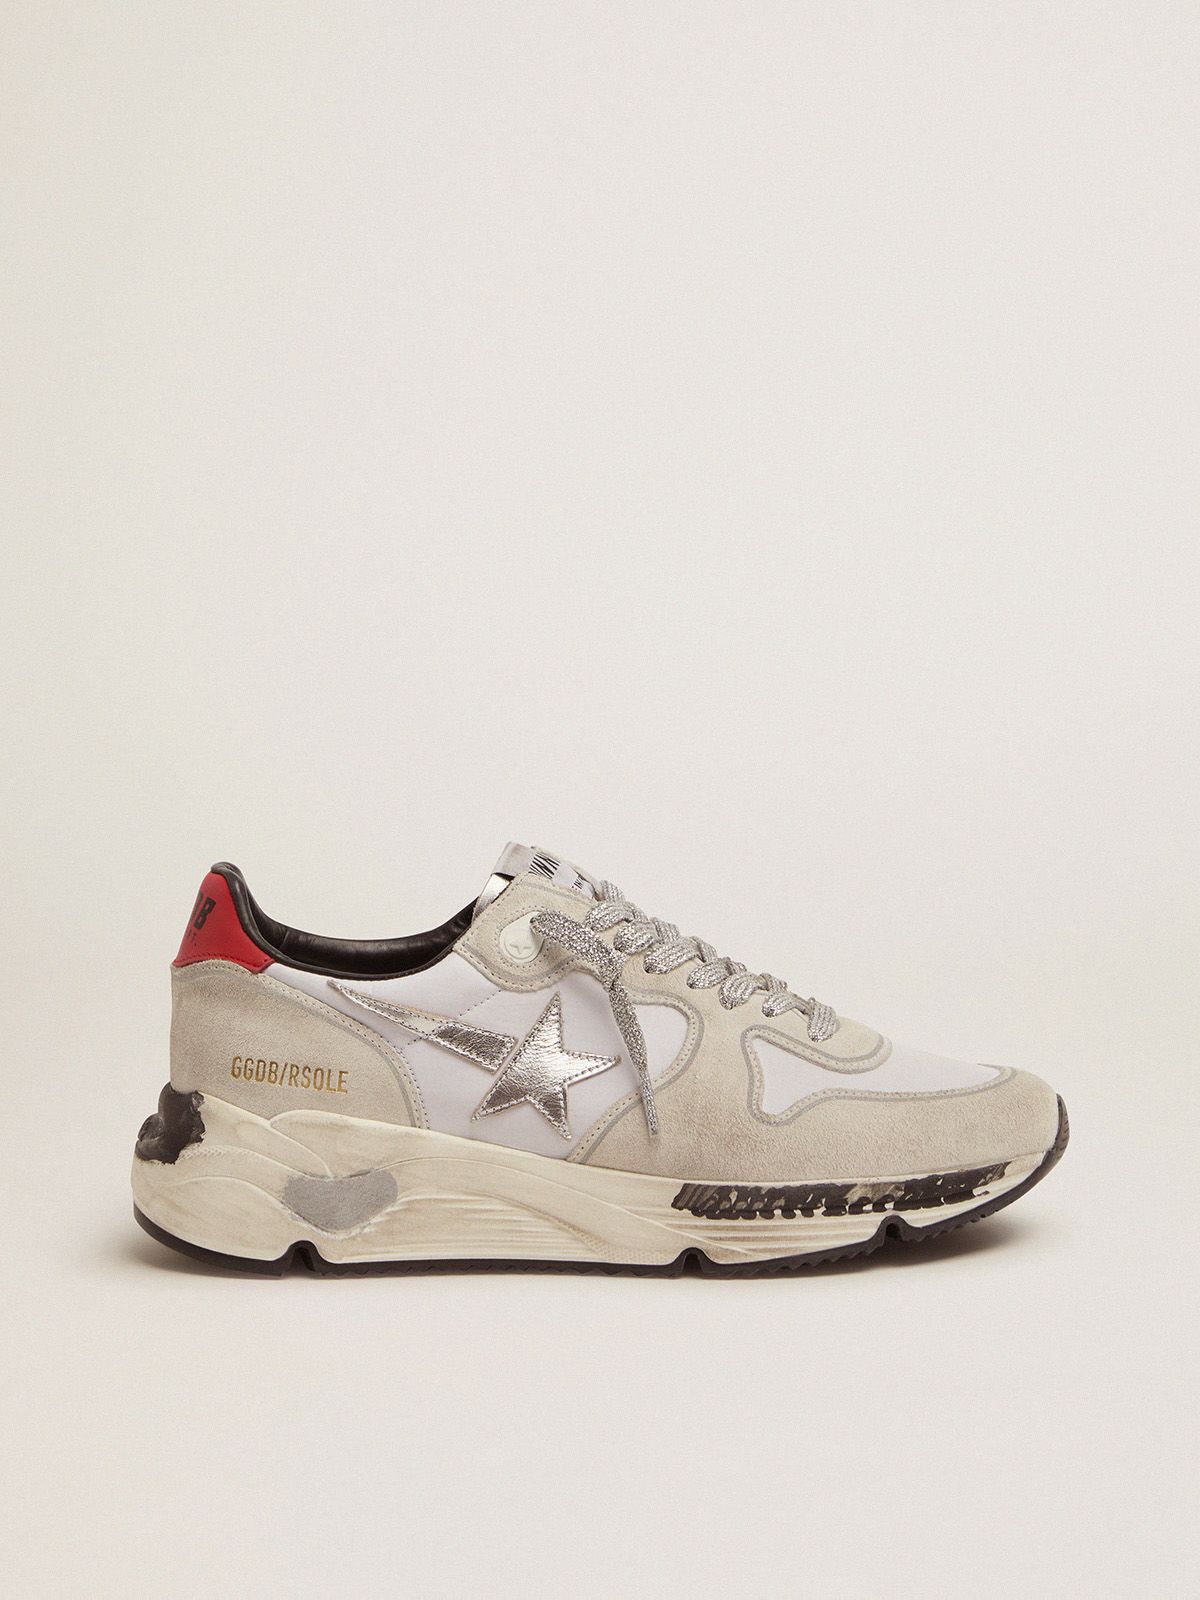 golden goose silver and sneakers Running red with Sole tab heel star